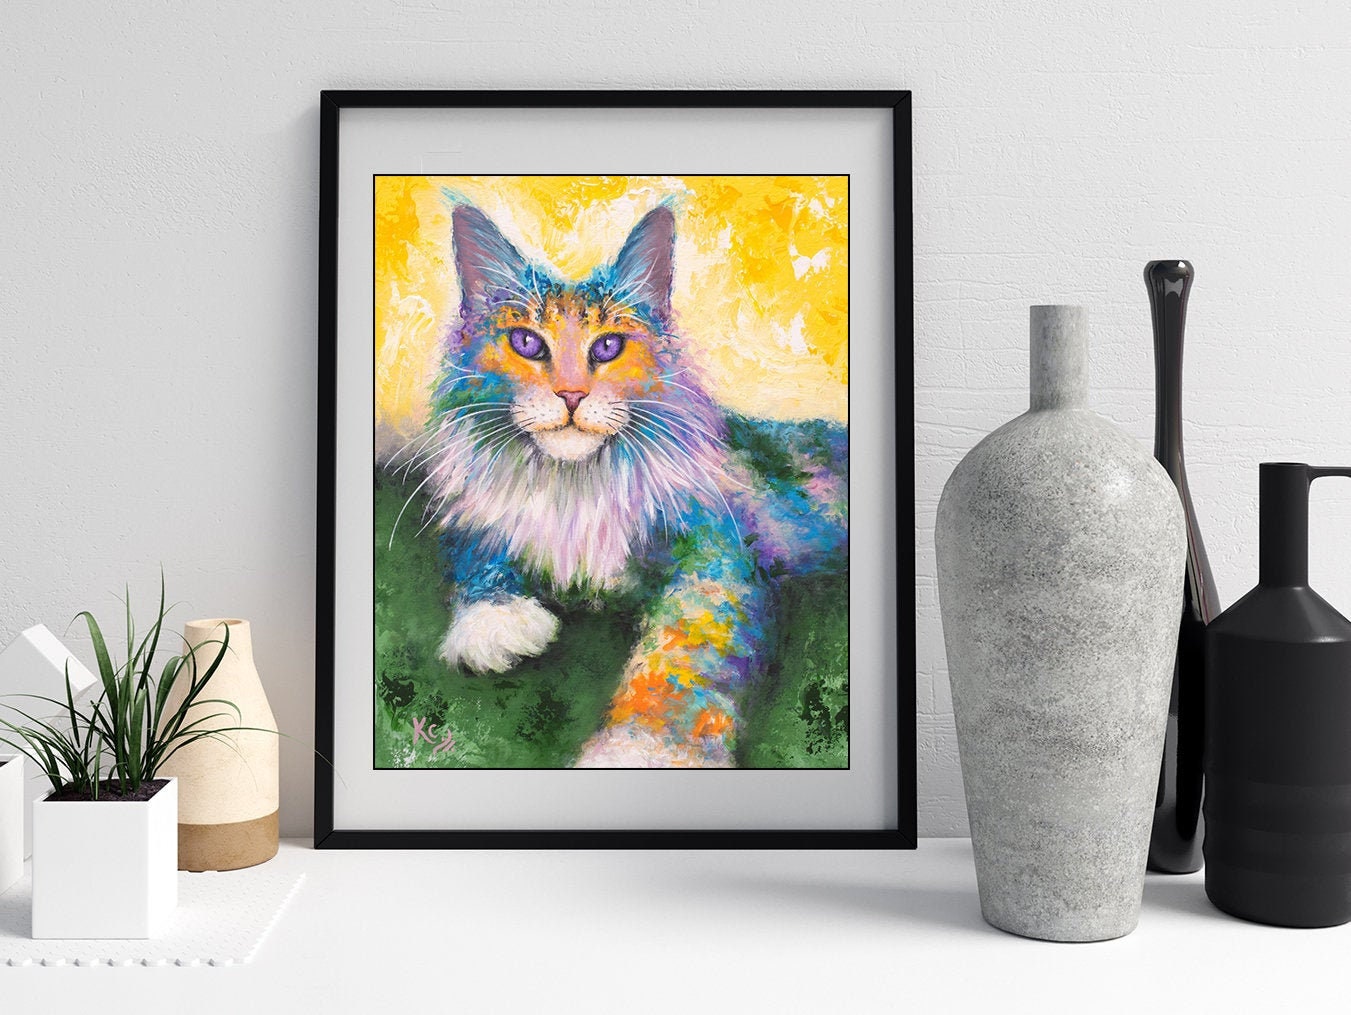 Maine Coon Cat Print - Cat Painting. Long-Haired Cat Art on CANVAS or PAPER by Krystle Cole